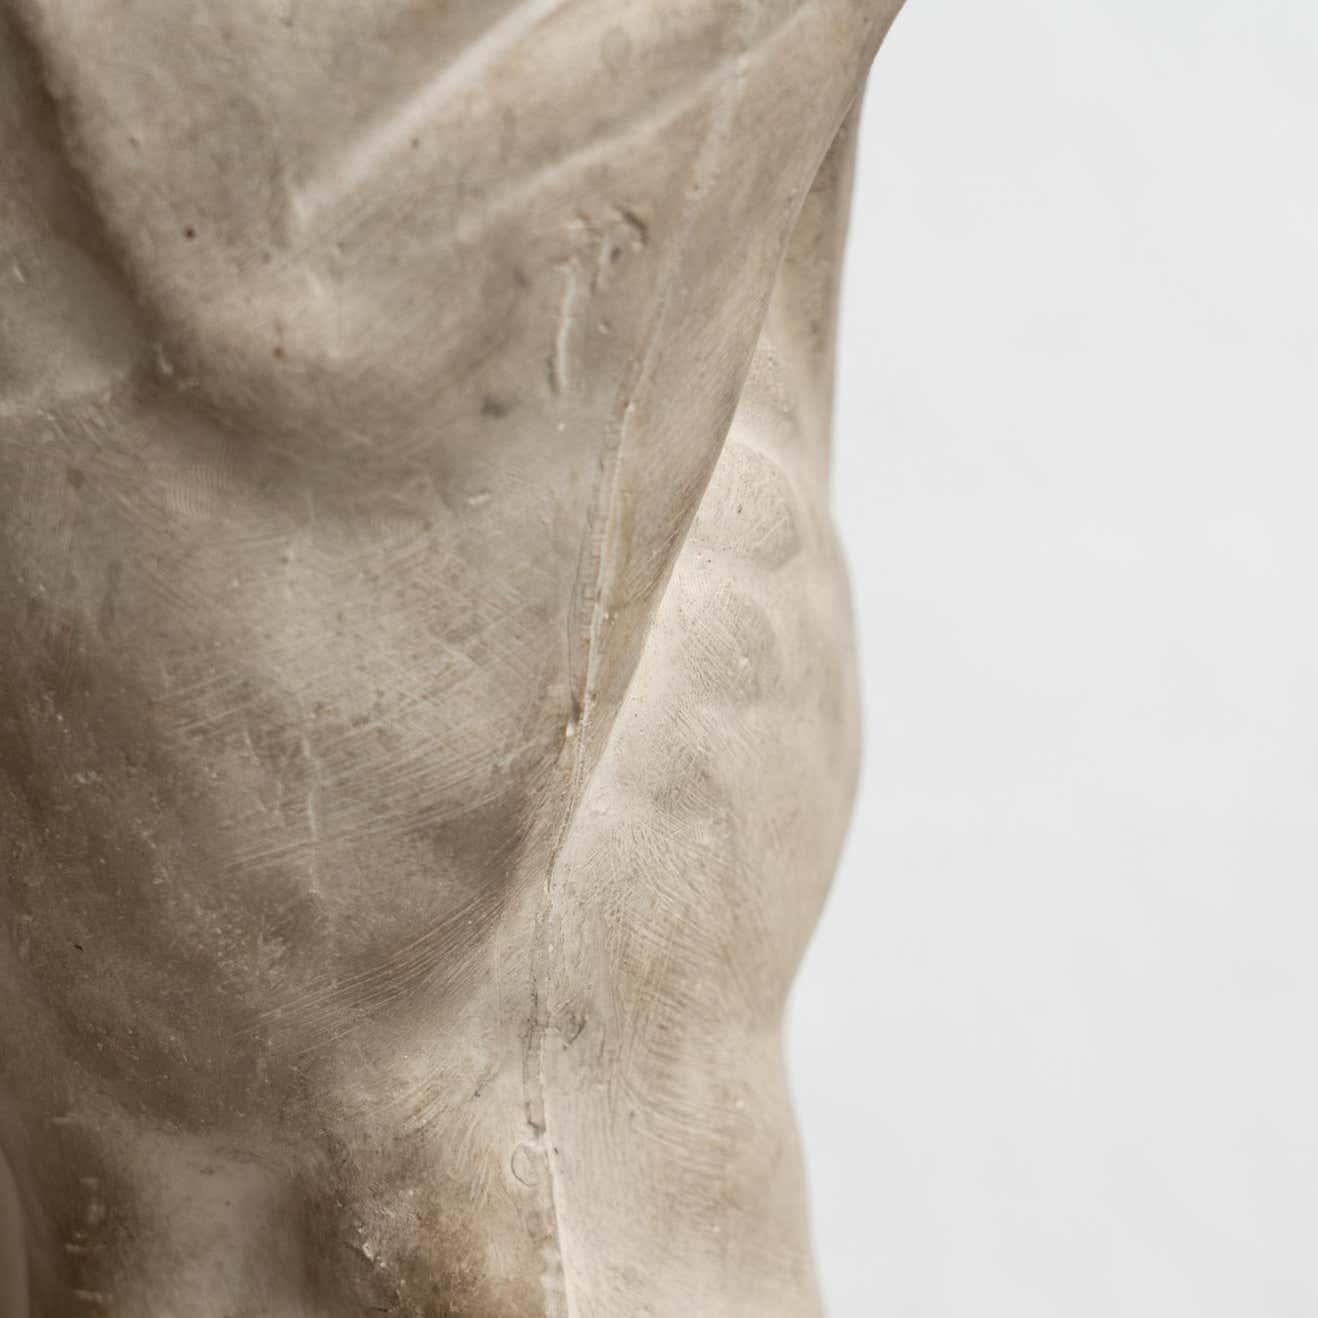 Mid-20th Century Rare Find, an Early Plaster Human Anatomy Sculpture of a Man, circa 1930